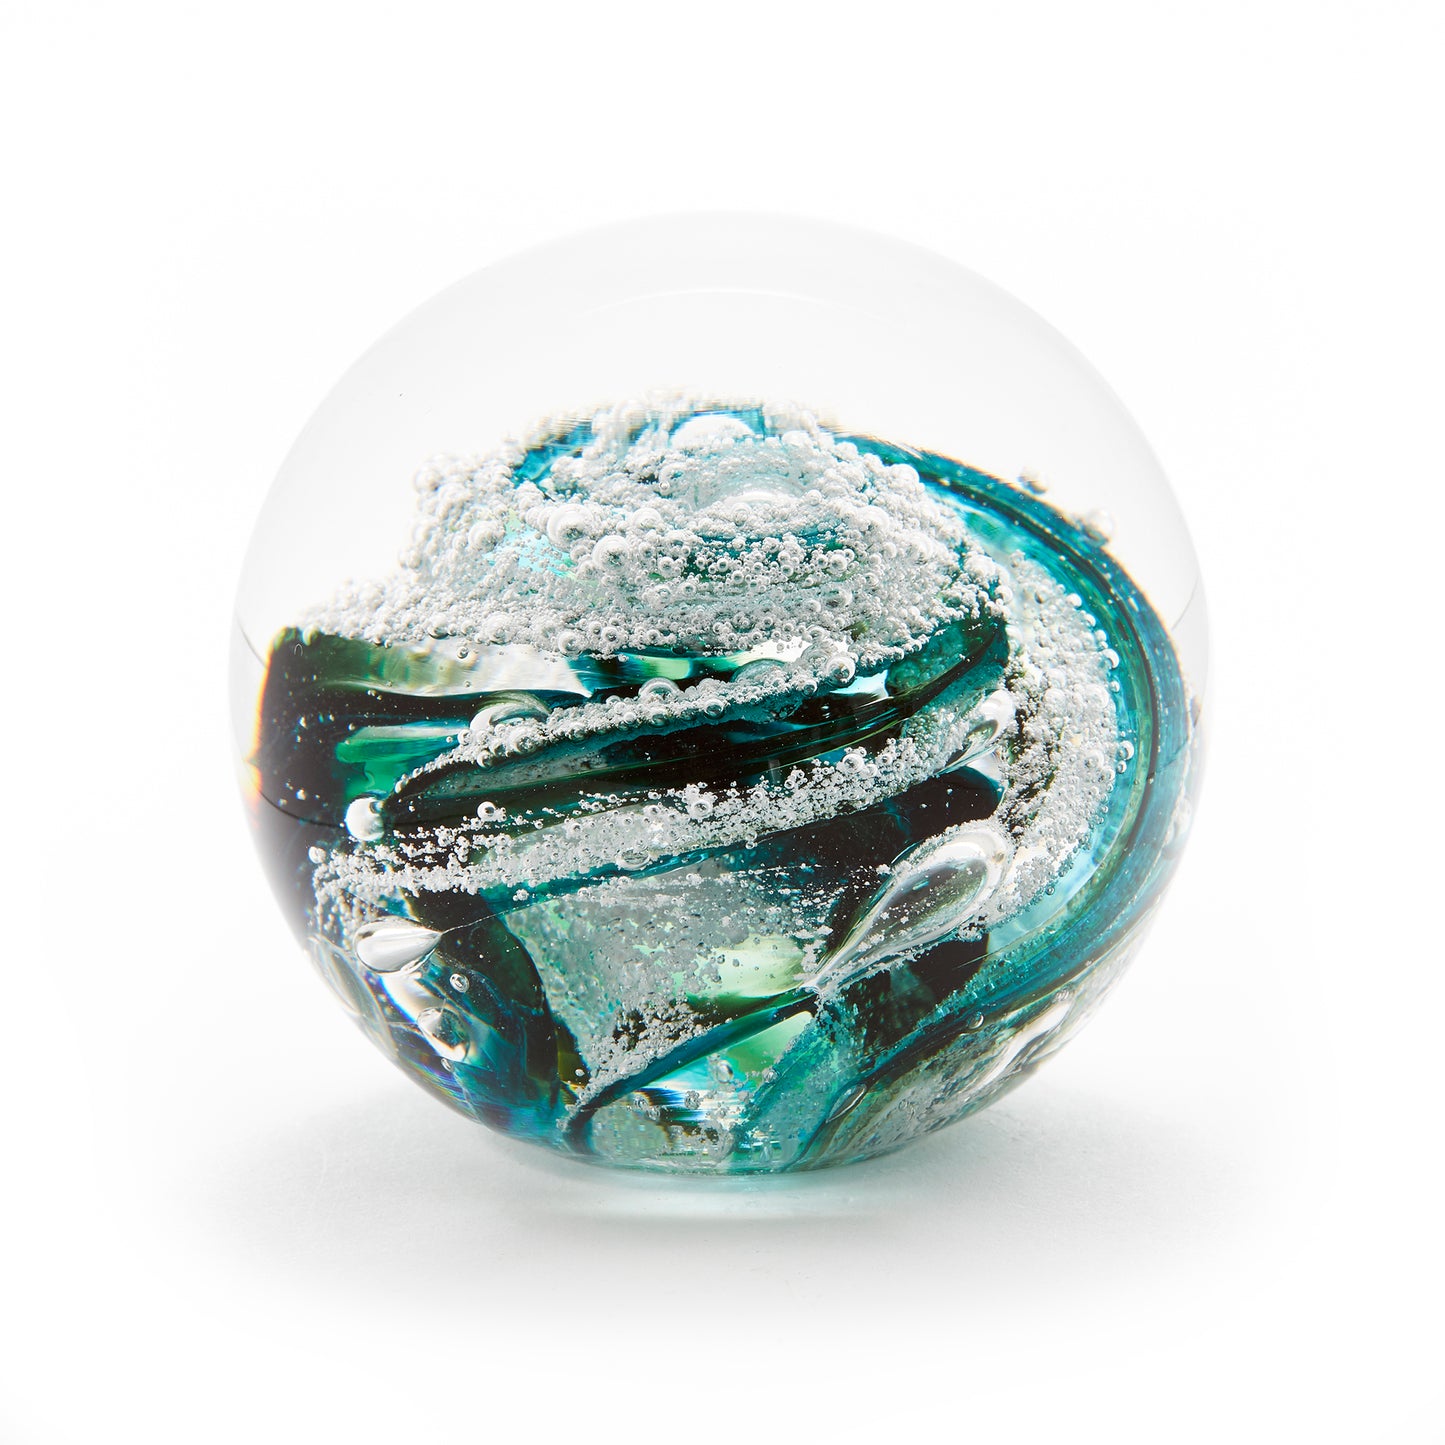 Round memorial glass art paperweight with cremation ash. Green glass. Colour combination is called “Emerald.”